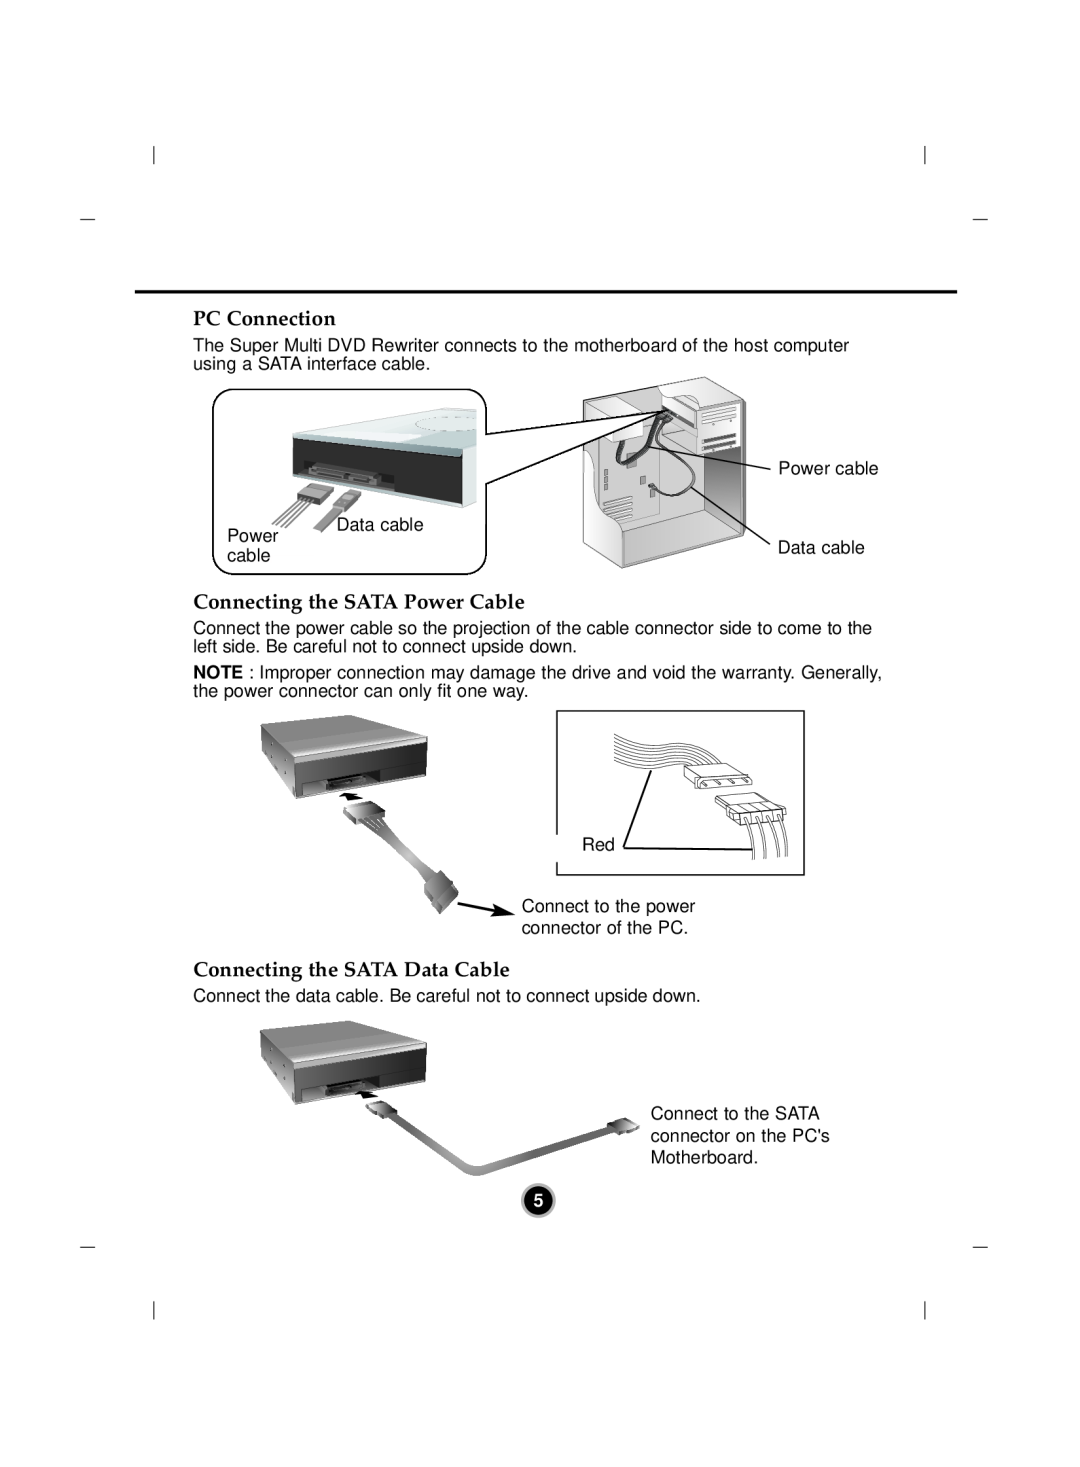 LG Electronics GH22 manual PC Connection, Connecting the SATA Power Cable, Connecting the SATA Data Cable, Power cable 